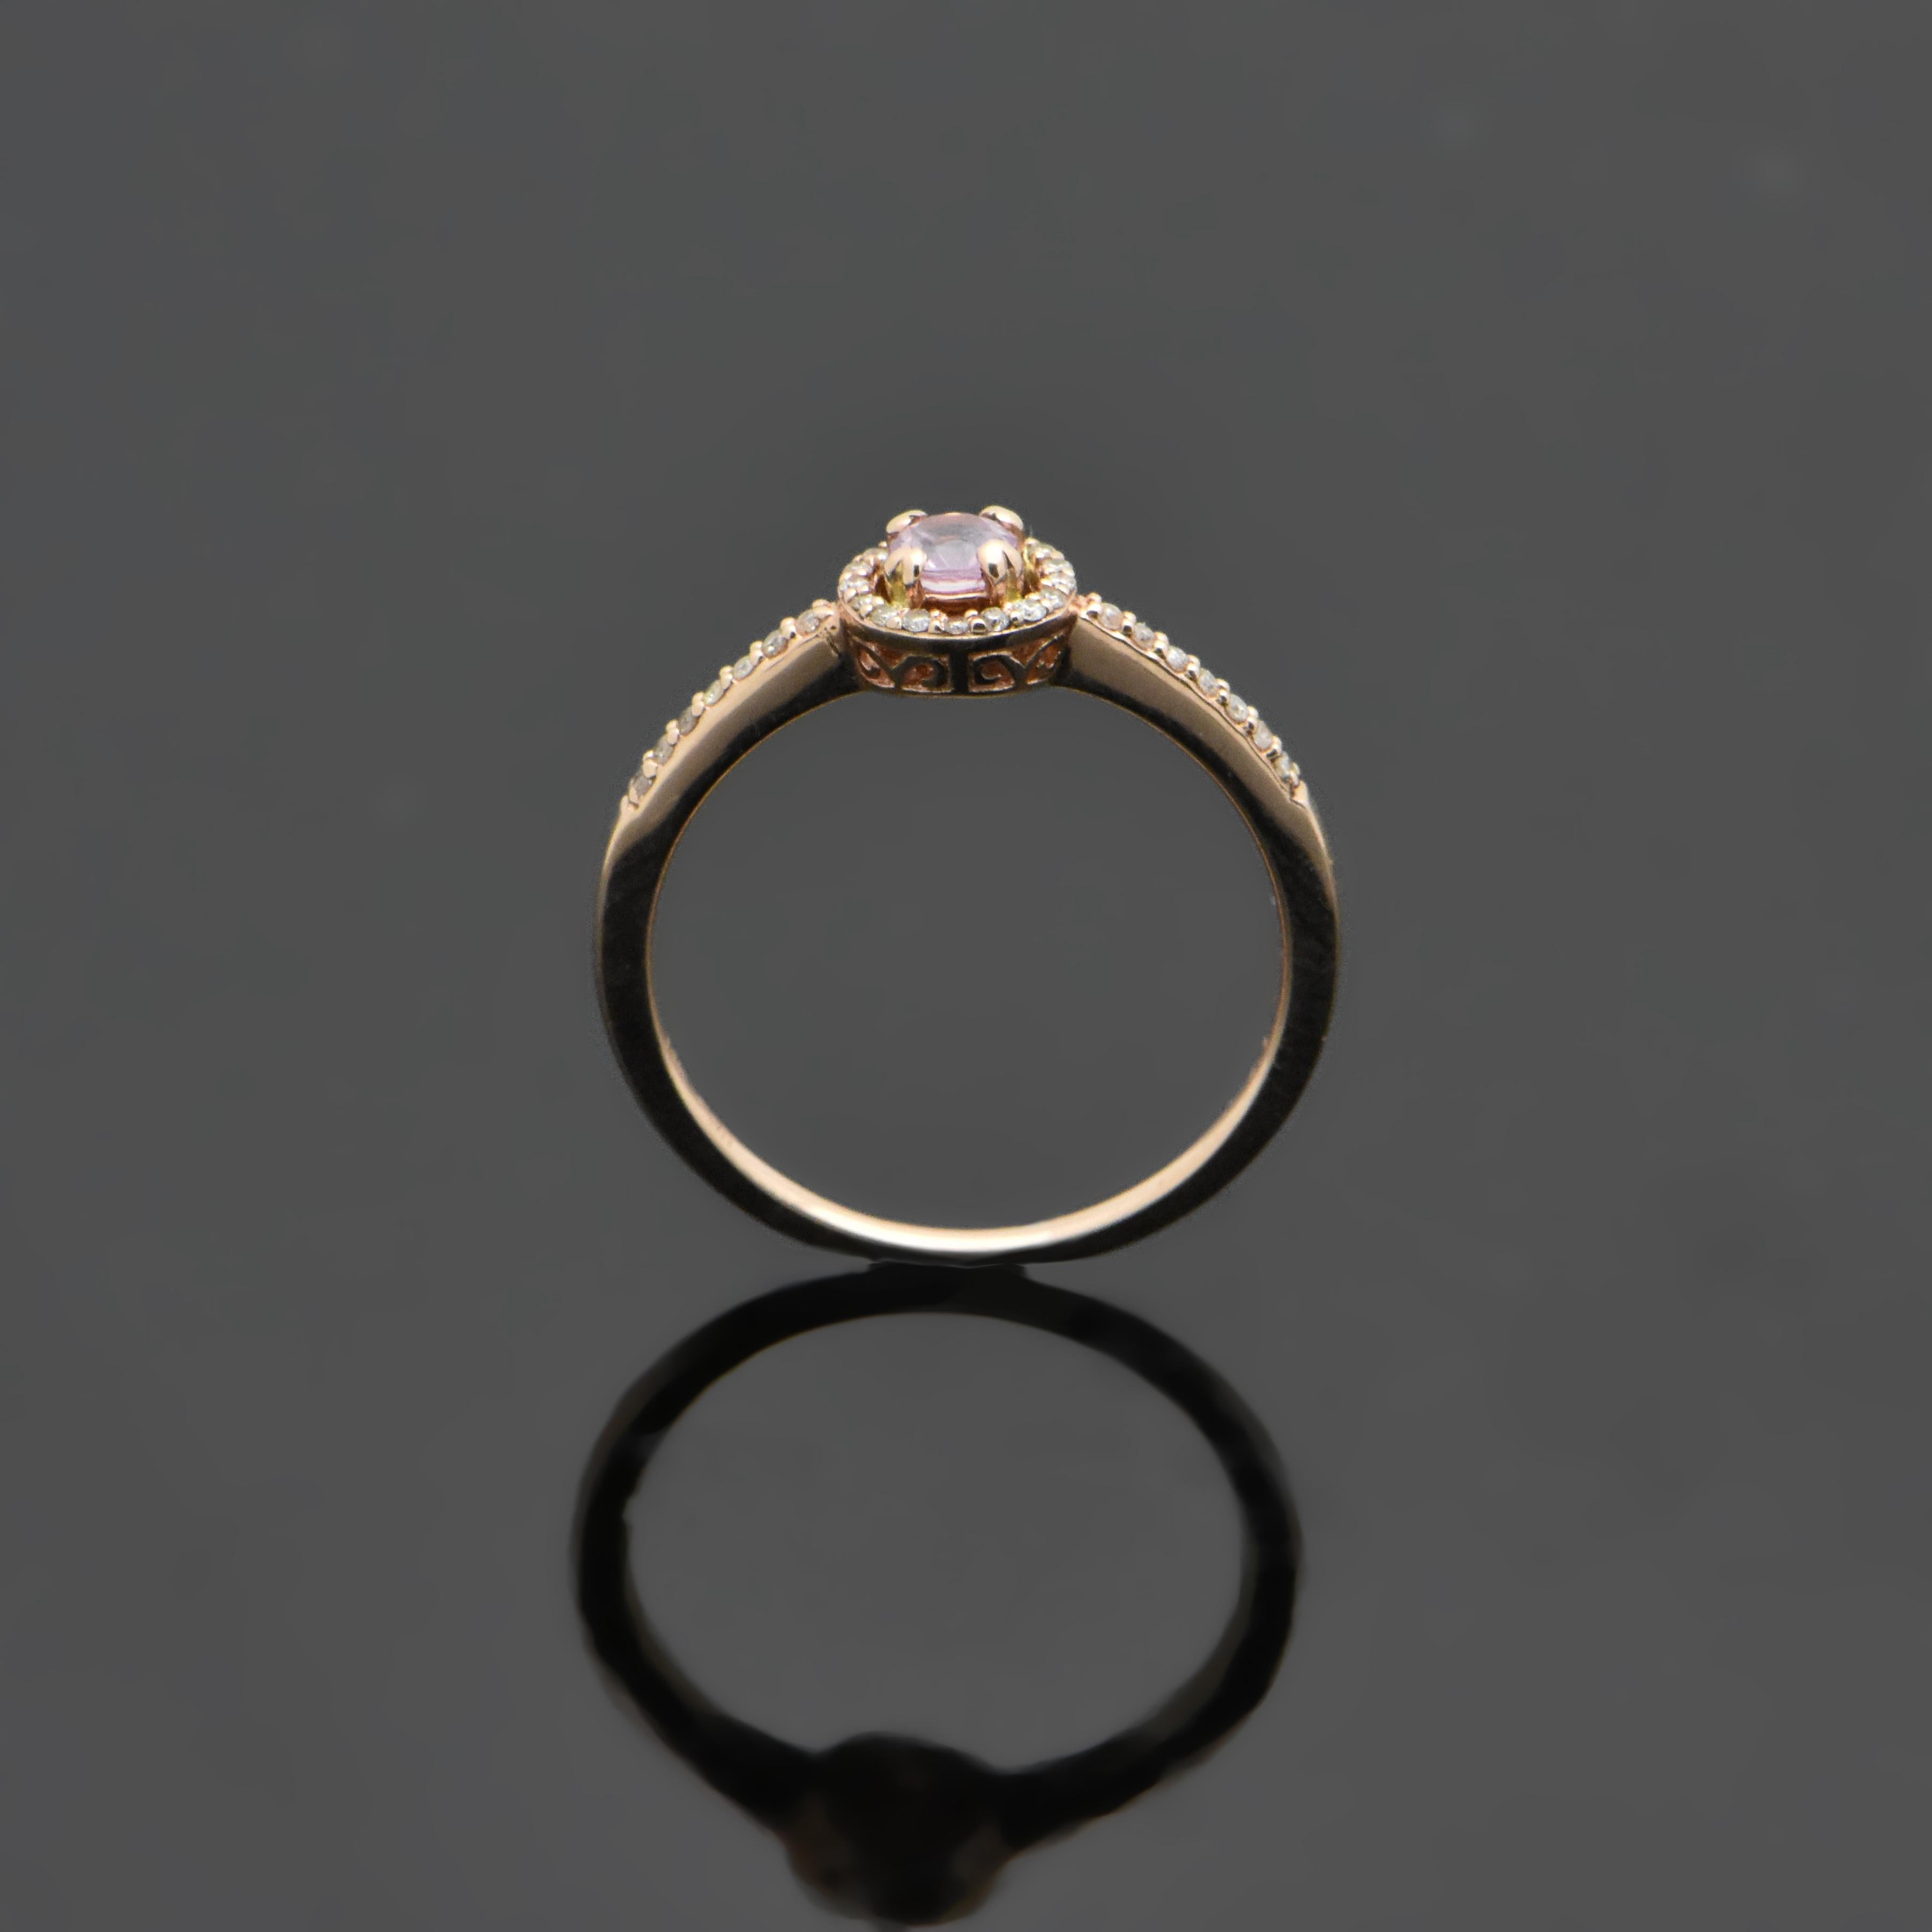 This petite 14kt rose gold ring features a pink sapphire with an estimated weight of 0.16ct. The sapphire is surrounded by a halo of diamonds as well as diamonds down each shank. The diamonds are estimated at 0.11cttw. Estimated weight of gold is